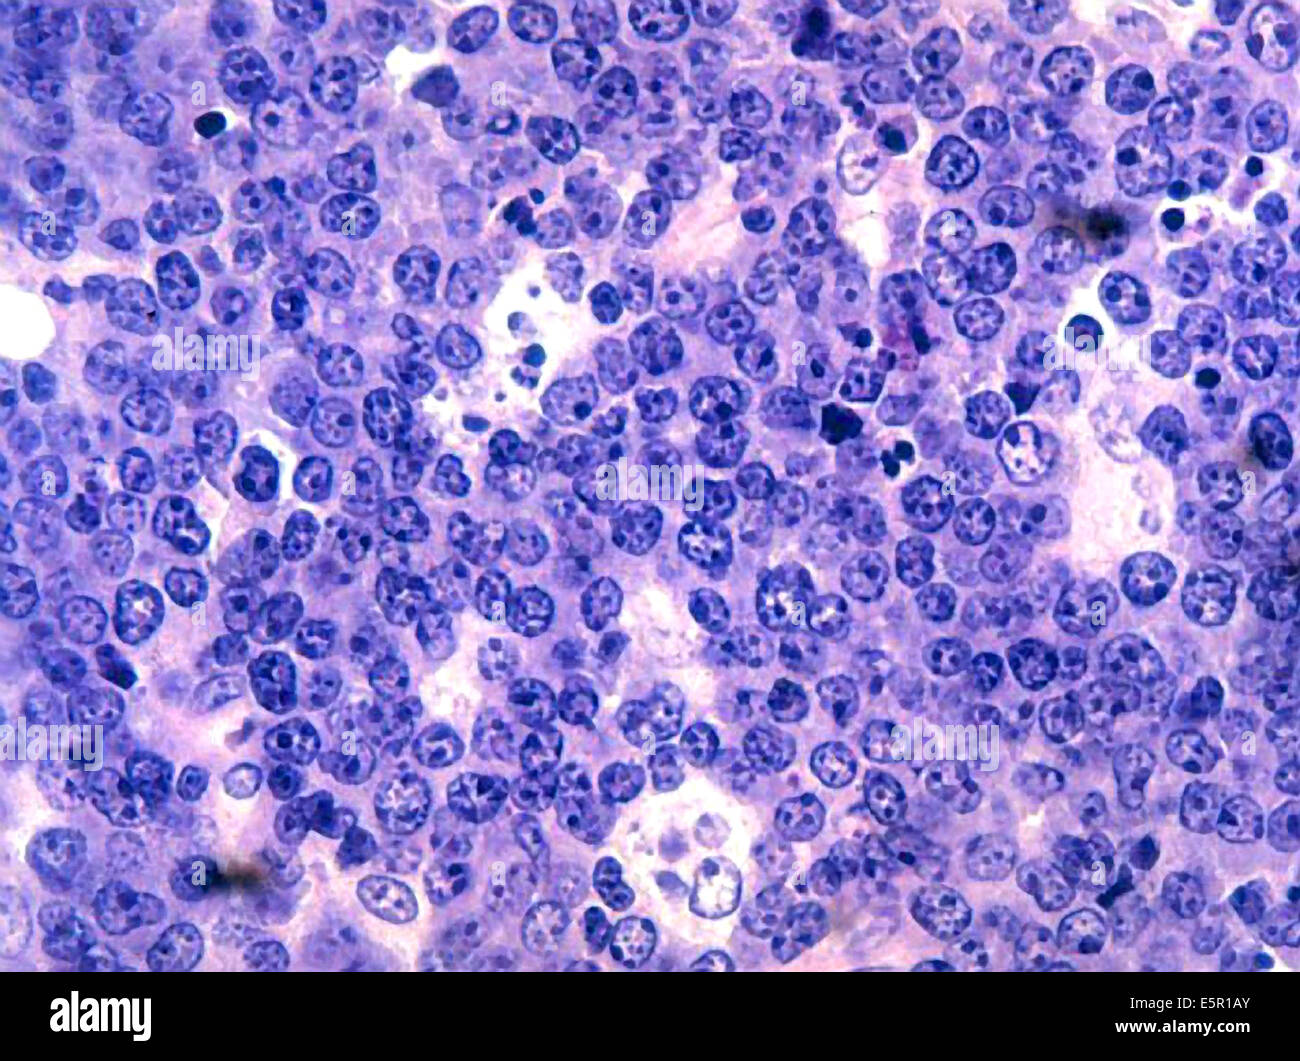 Photomicrograph of malignant B-cell lymphocytes seen in Burkitt's lymphoma, The Epstein-Barr virus has been isolated from Stock Photo